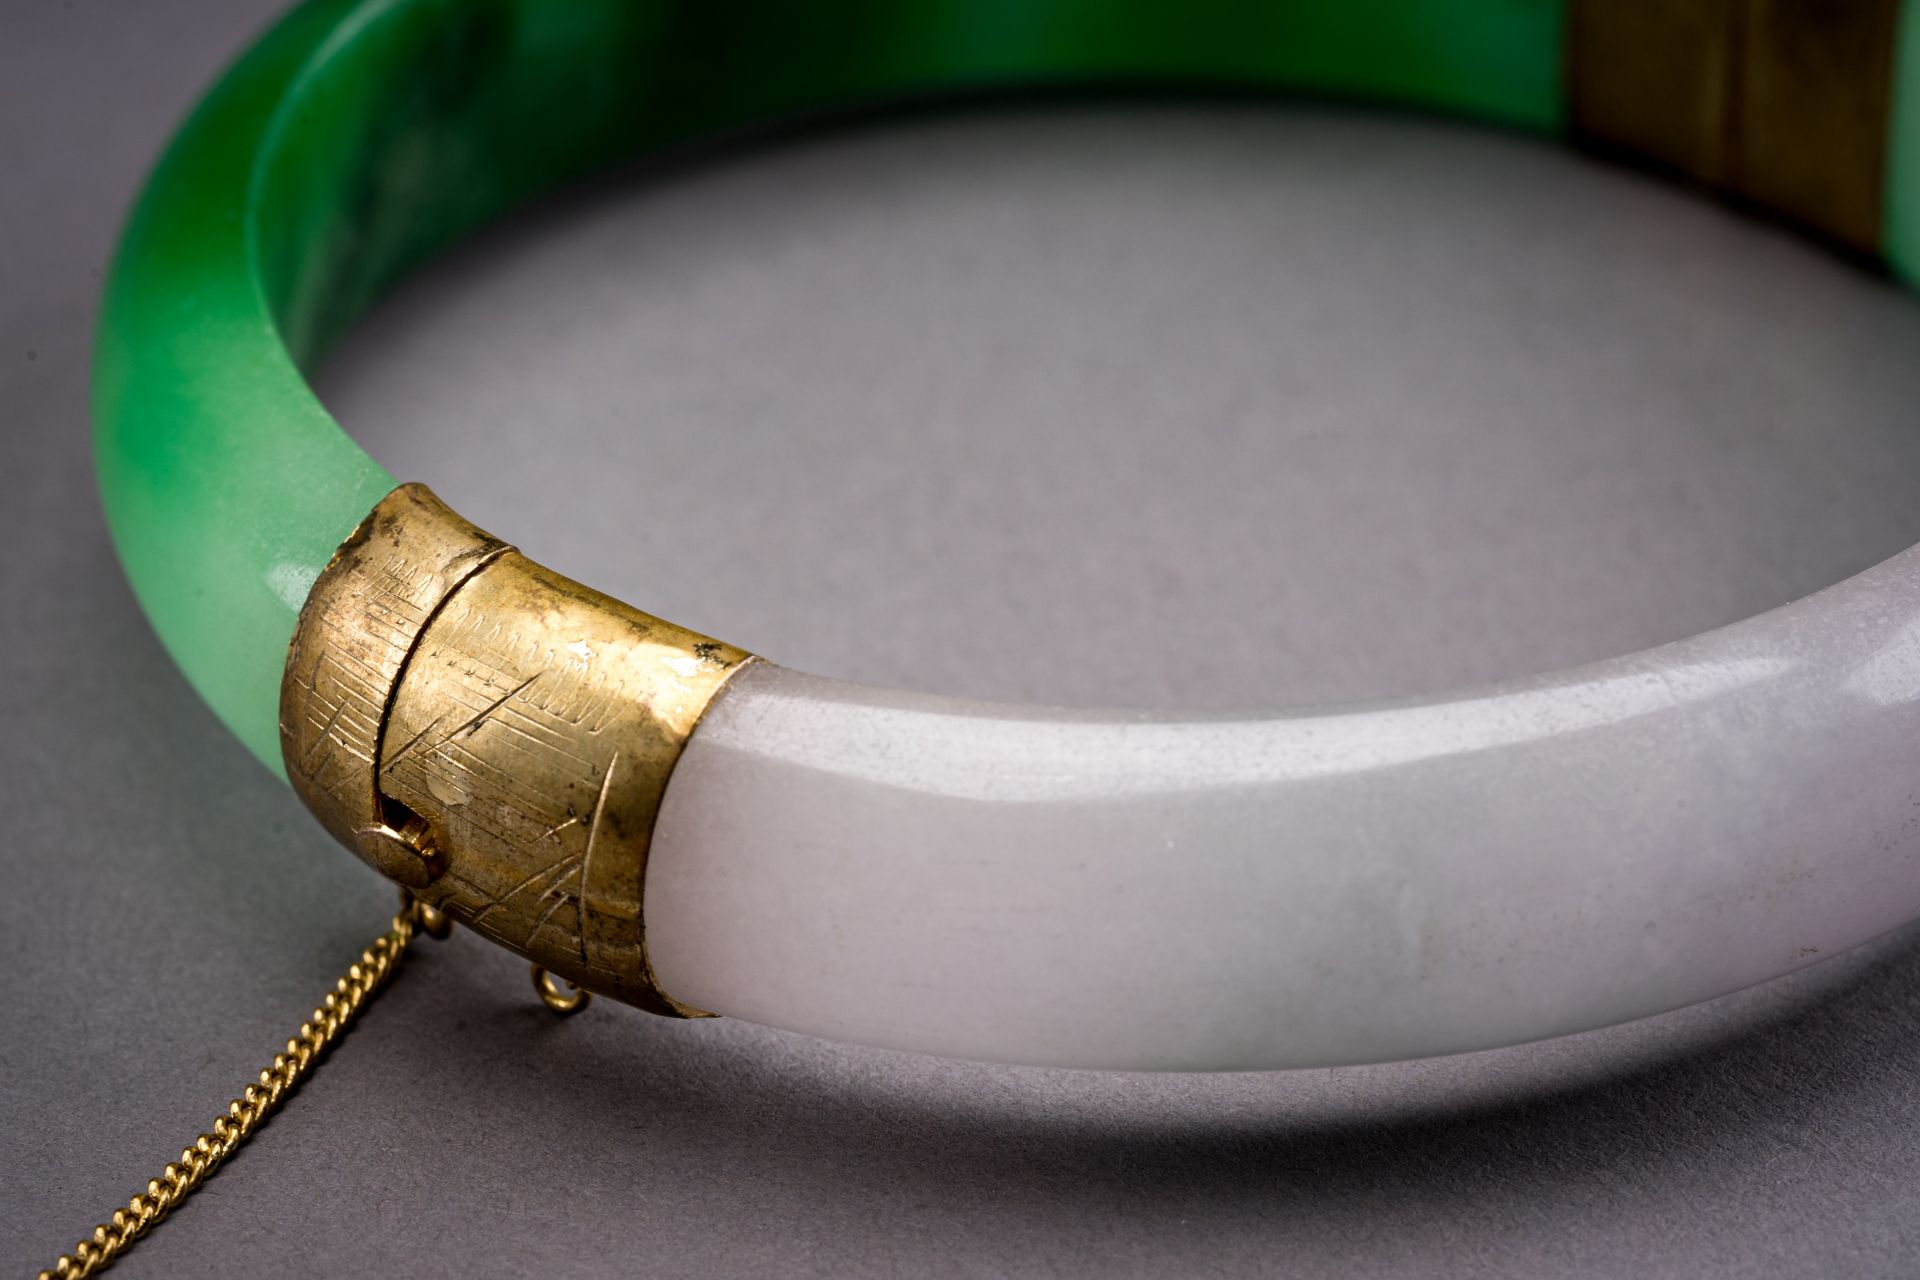 A PALE LAVENDER AND EMERALD GREEN JADEITE BANGLE - Image 3 of 7